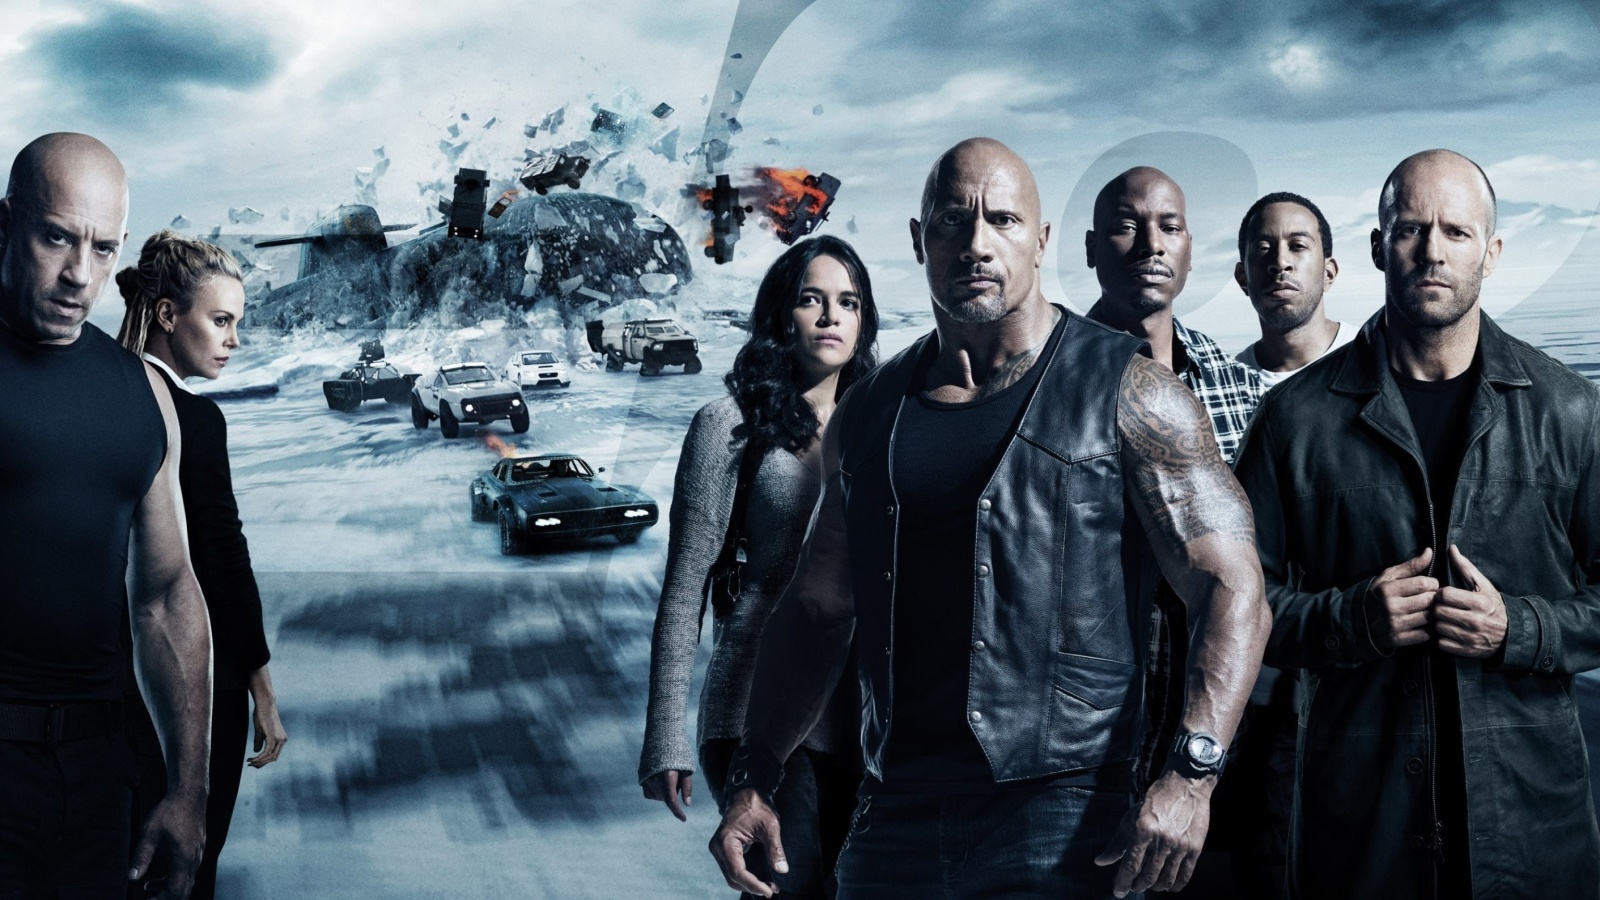 Das The Fate of the Furious with Vin Diesel, Dwayne Johnson, Charlize Theron Wallpaper 1600x900